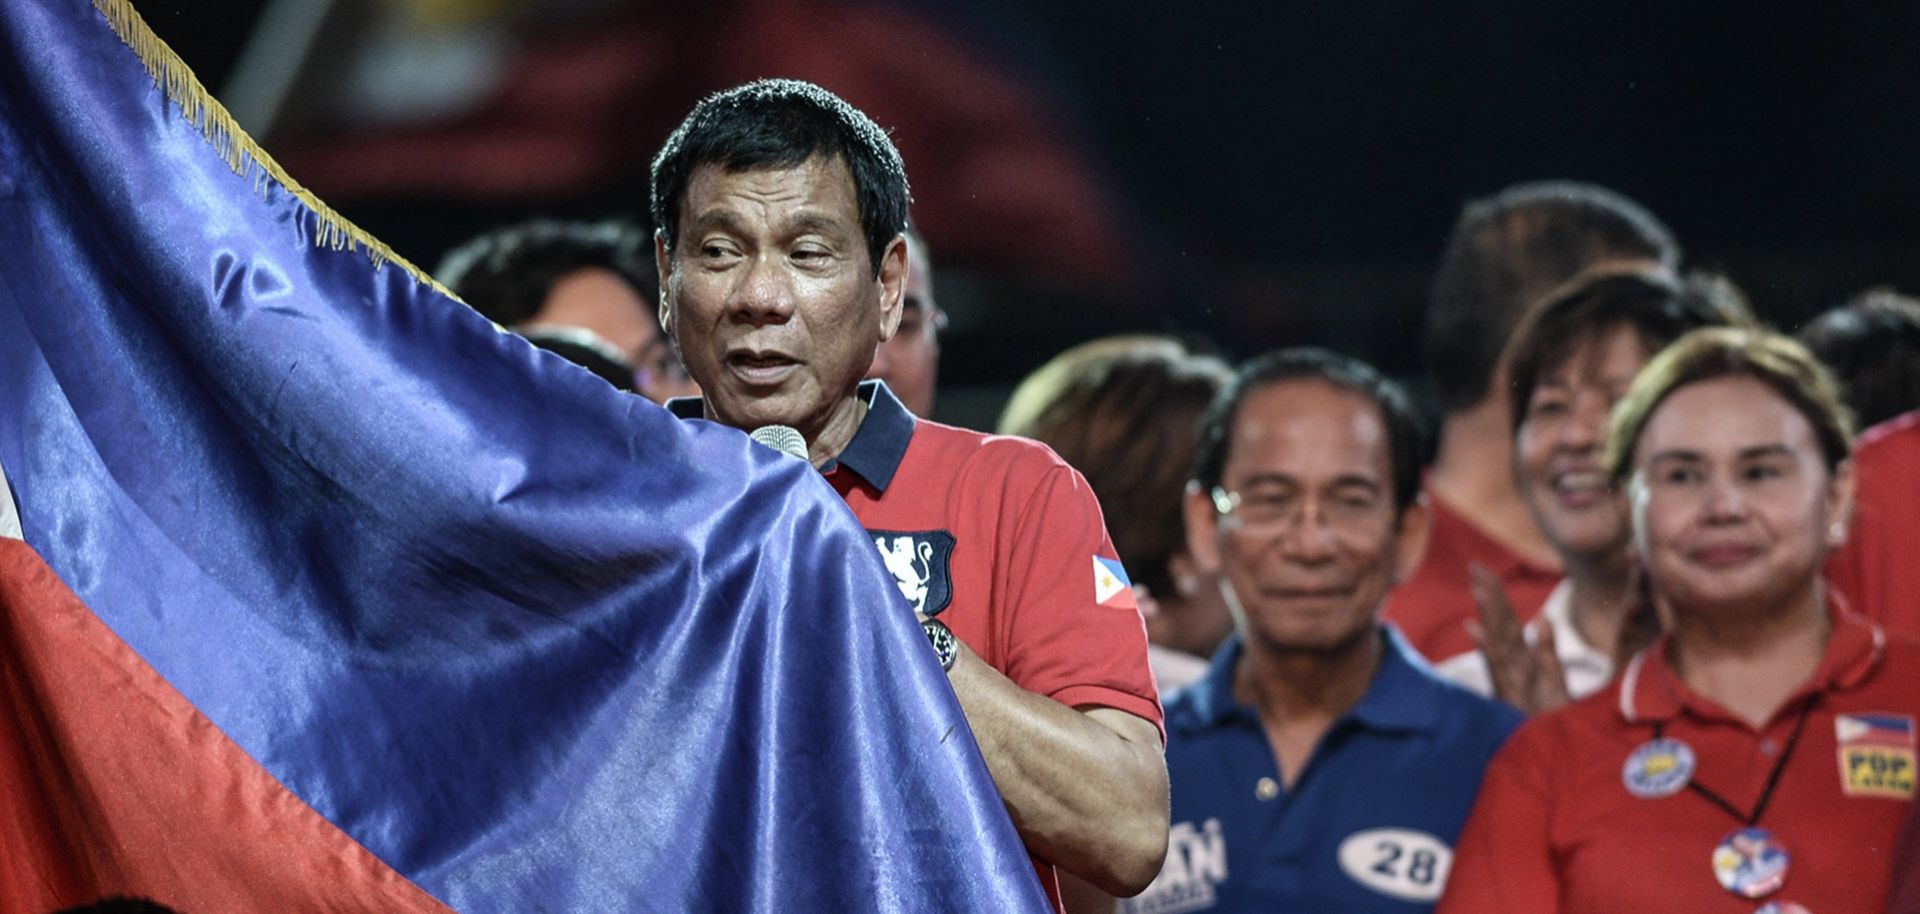 Since his election, Philippine President Rodrigo Duterte has upheld his campaign promises to aggressively fight the country's social ills, including by cracking down on drug dealers.